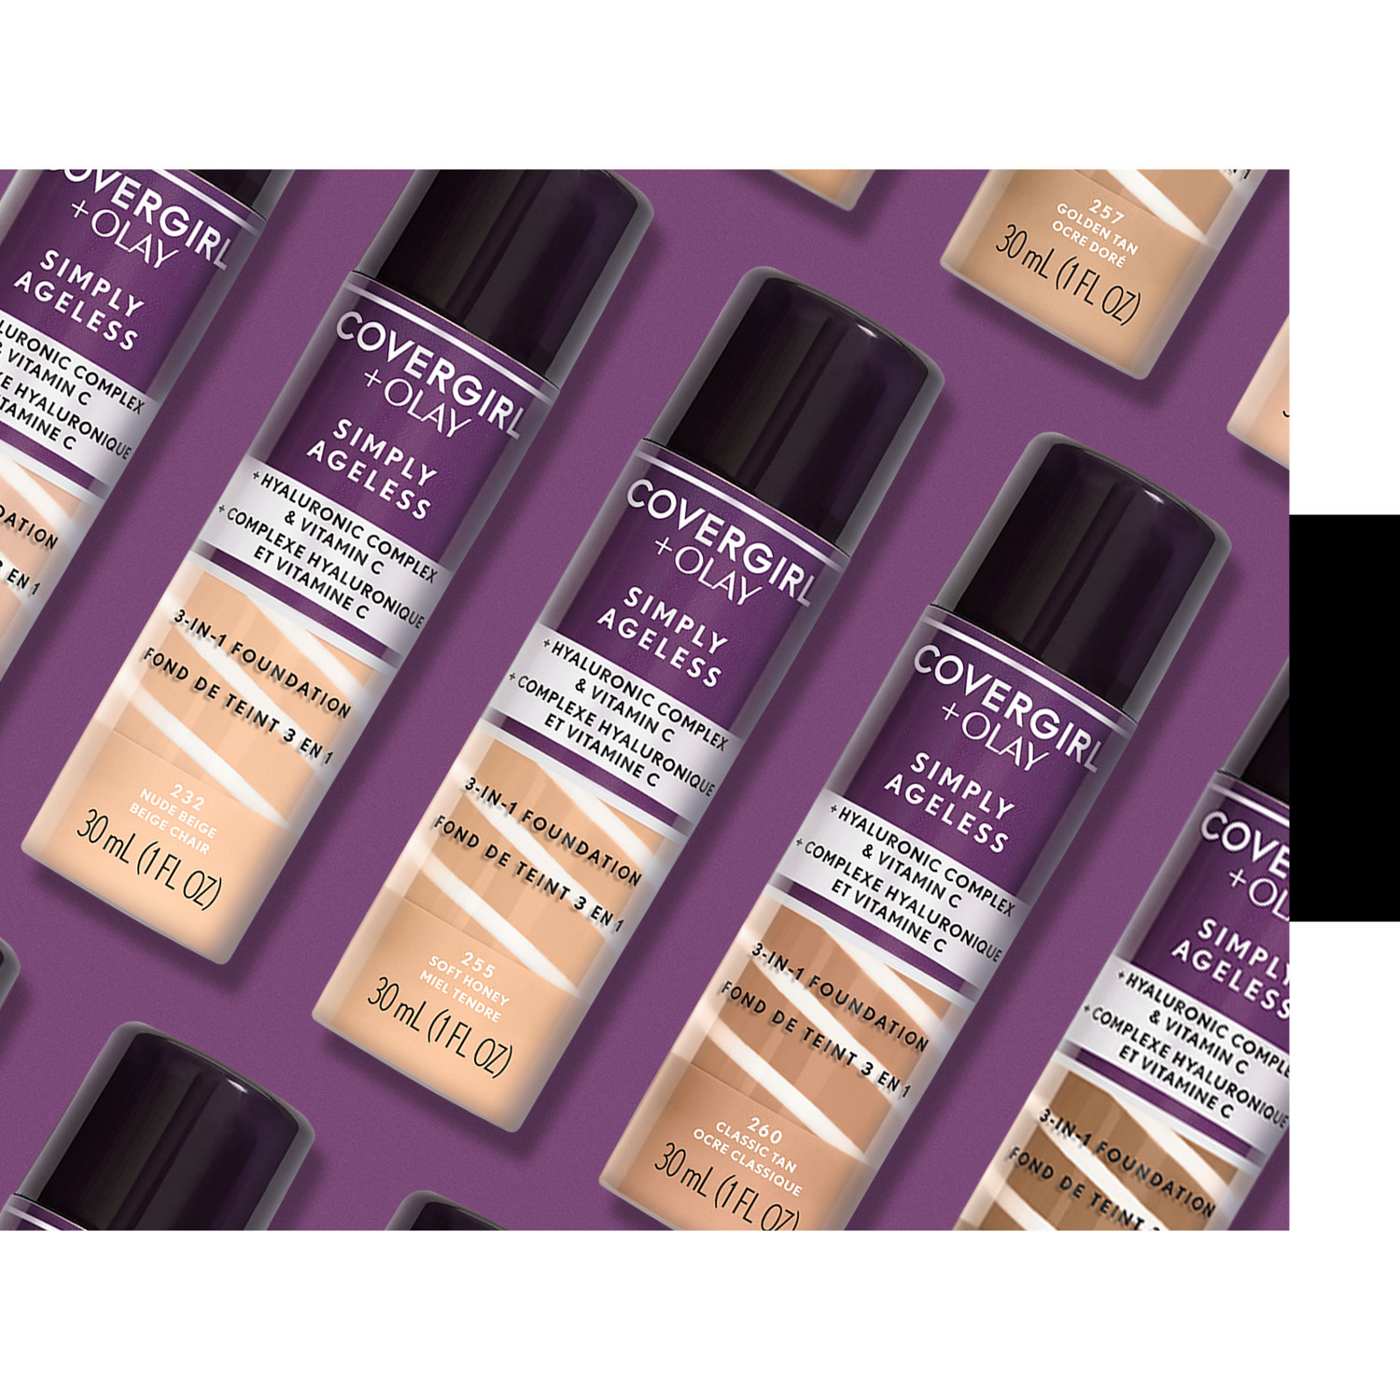 Covergirl Simply Ageless 3-in-1 Liquid Foundation 260 Classic Tan; image 2 of 6